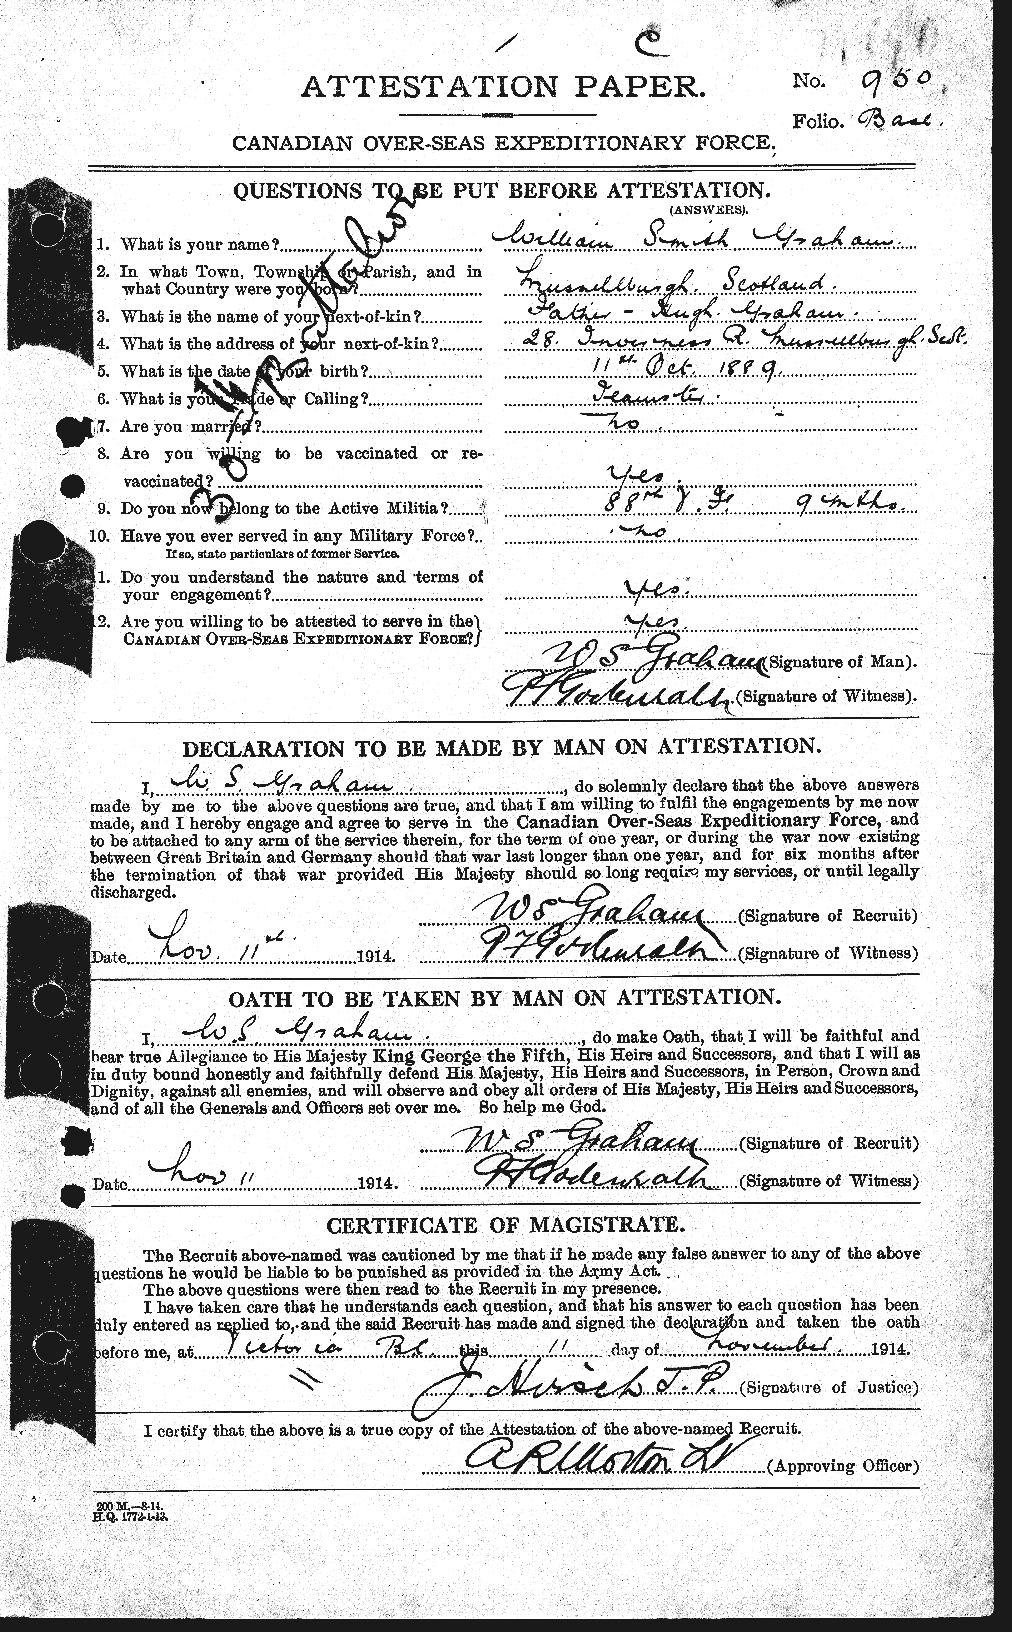 Personnel Records of the First World War - CEF 358041a